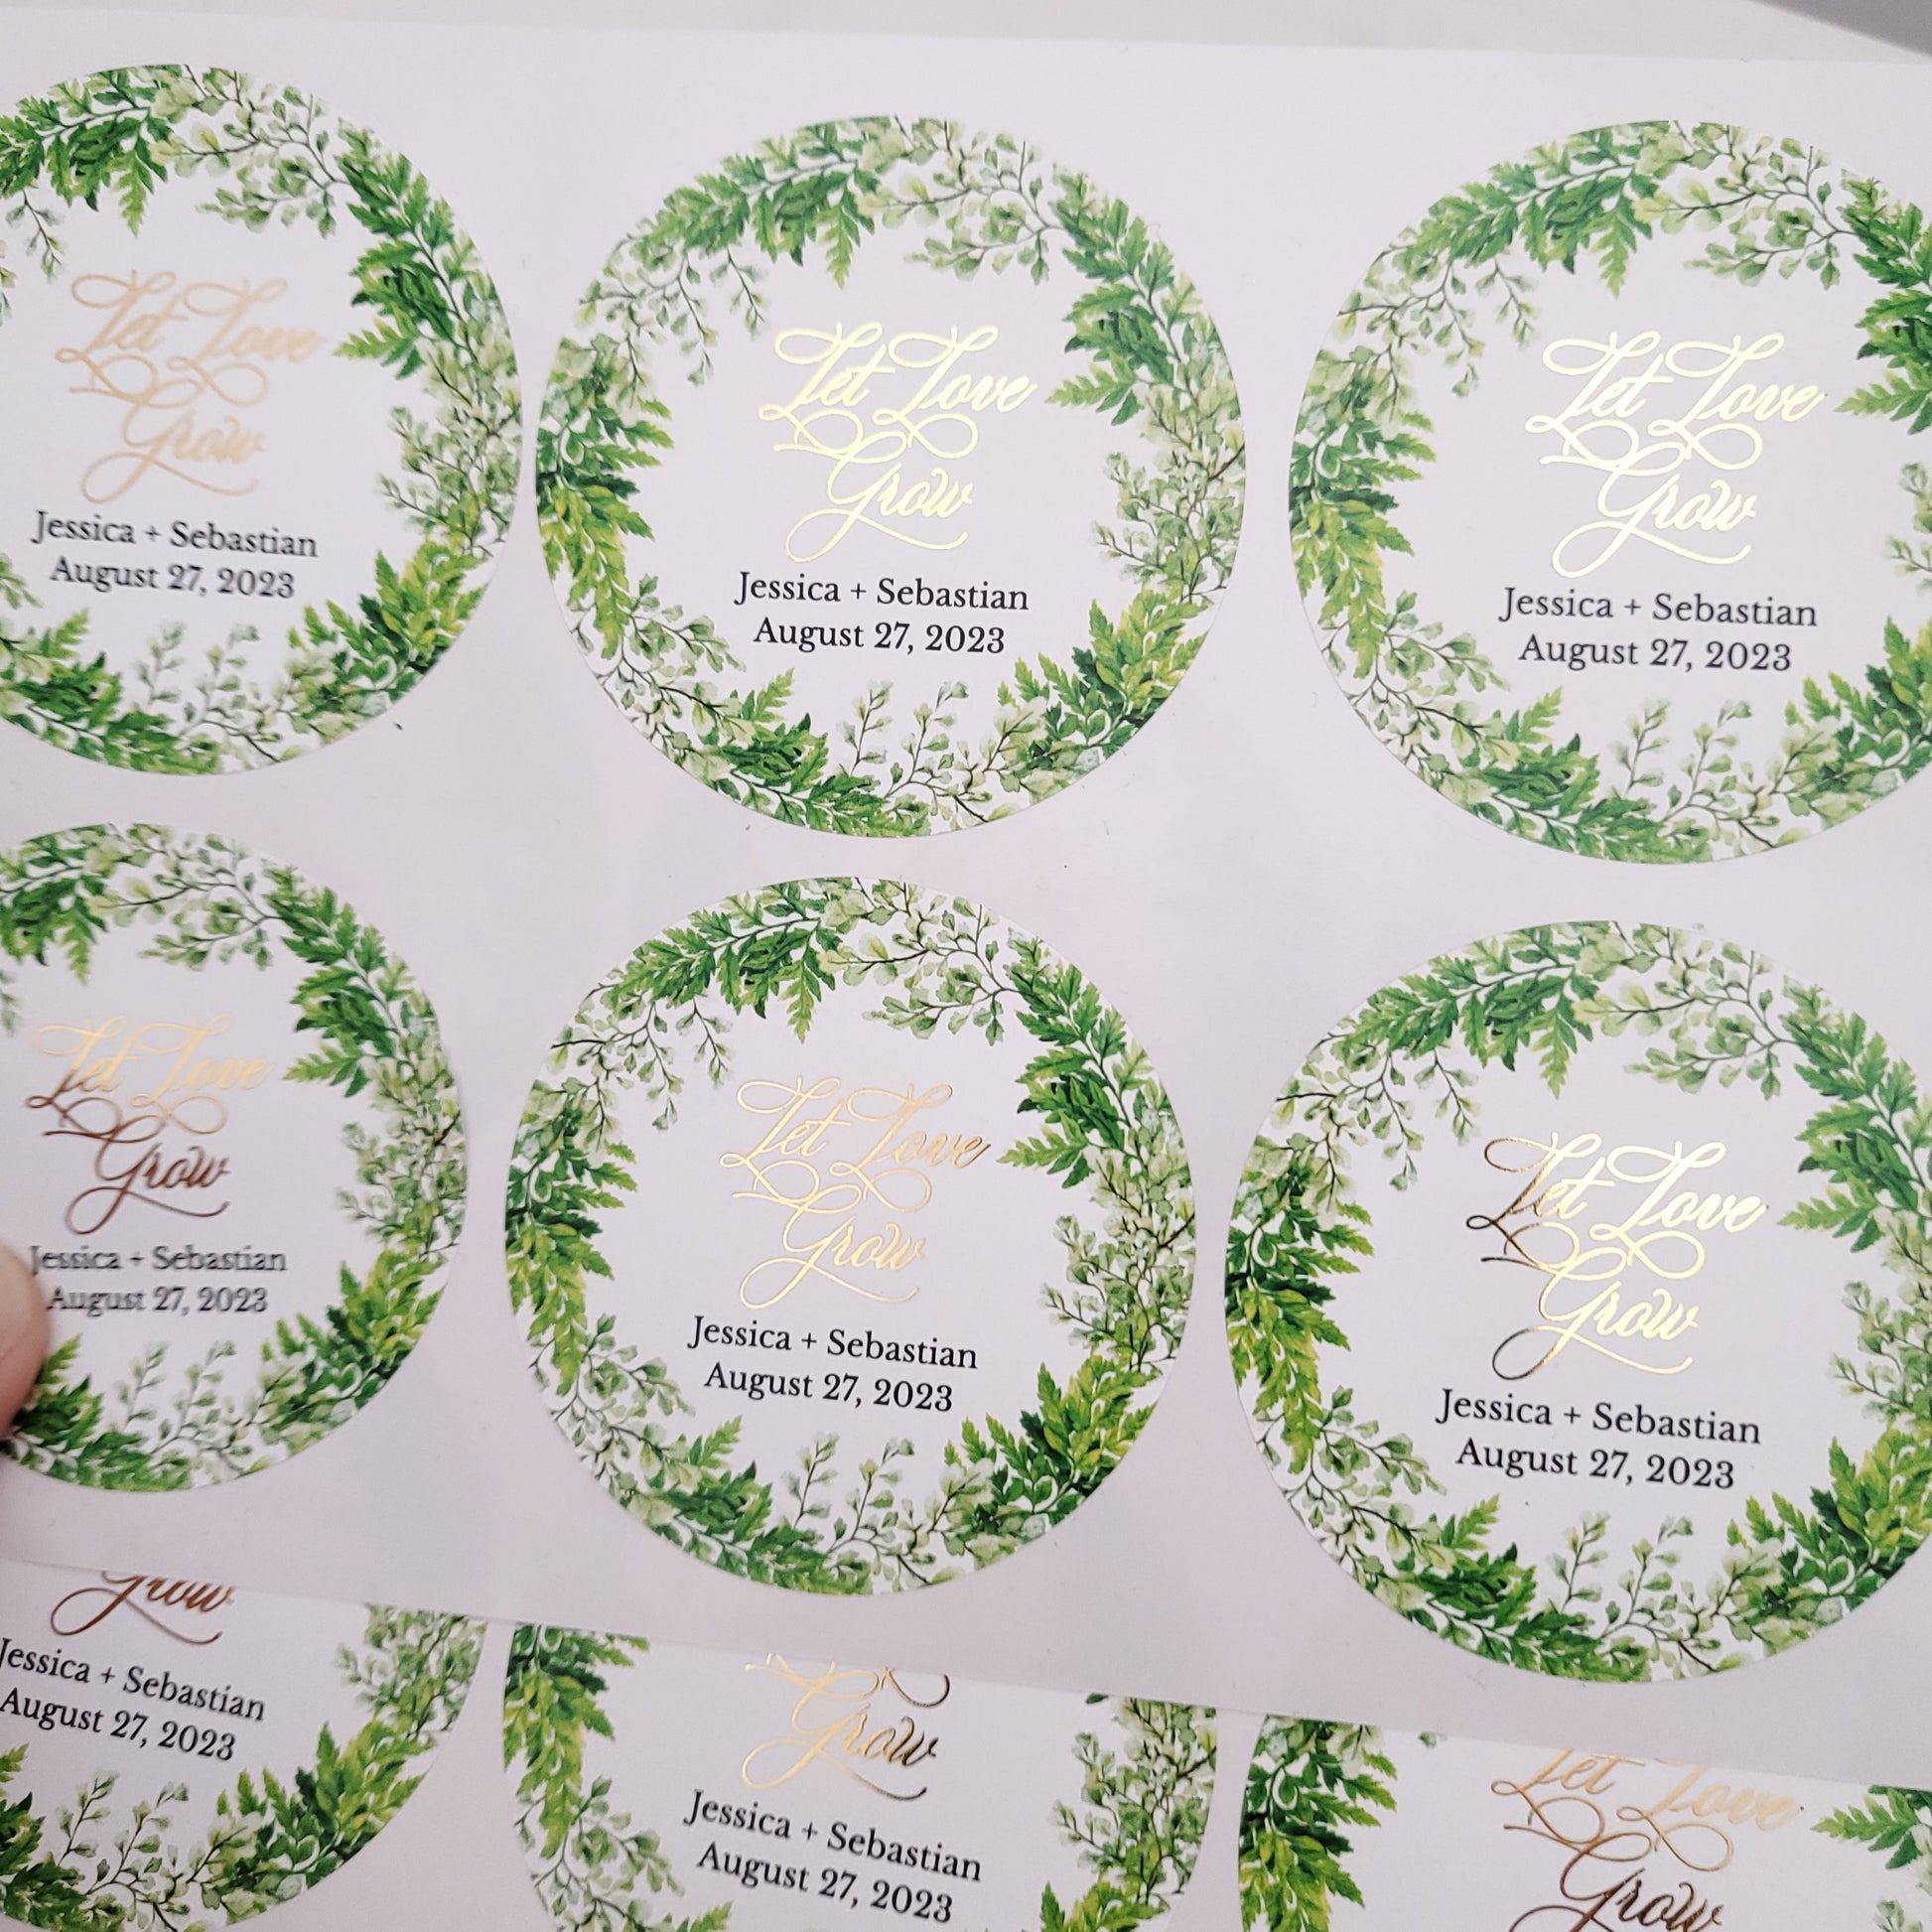 Personalized let love grow wedding favor stickers - XOXOKristen